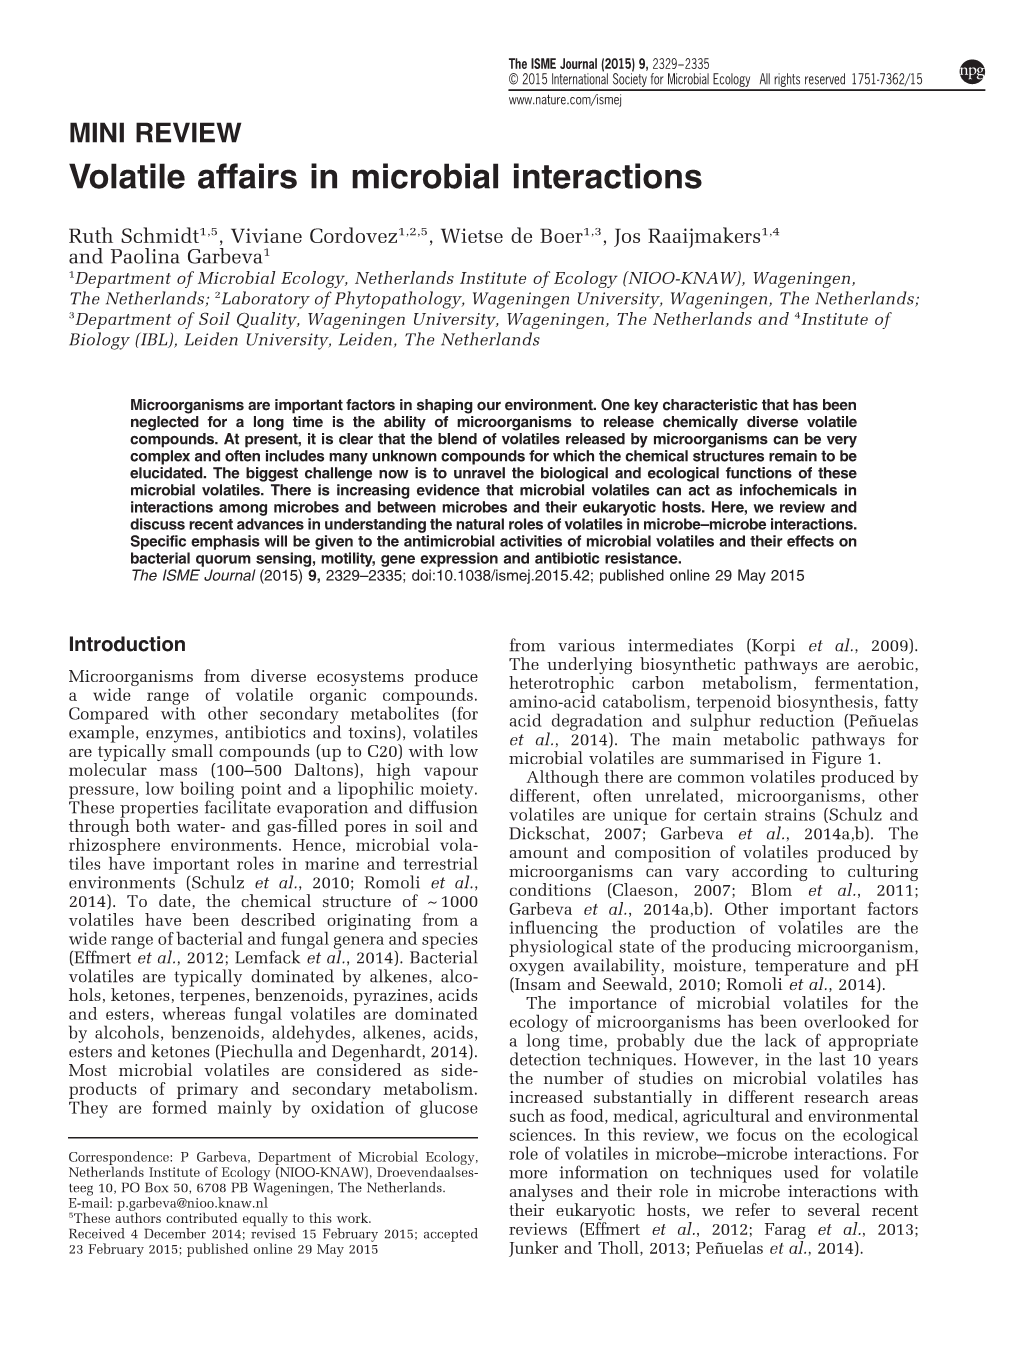 Volatile Affairs in Microbial Interactions